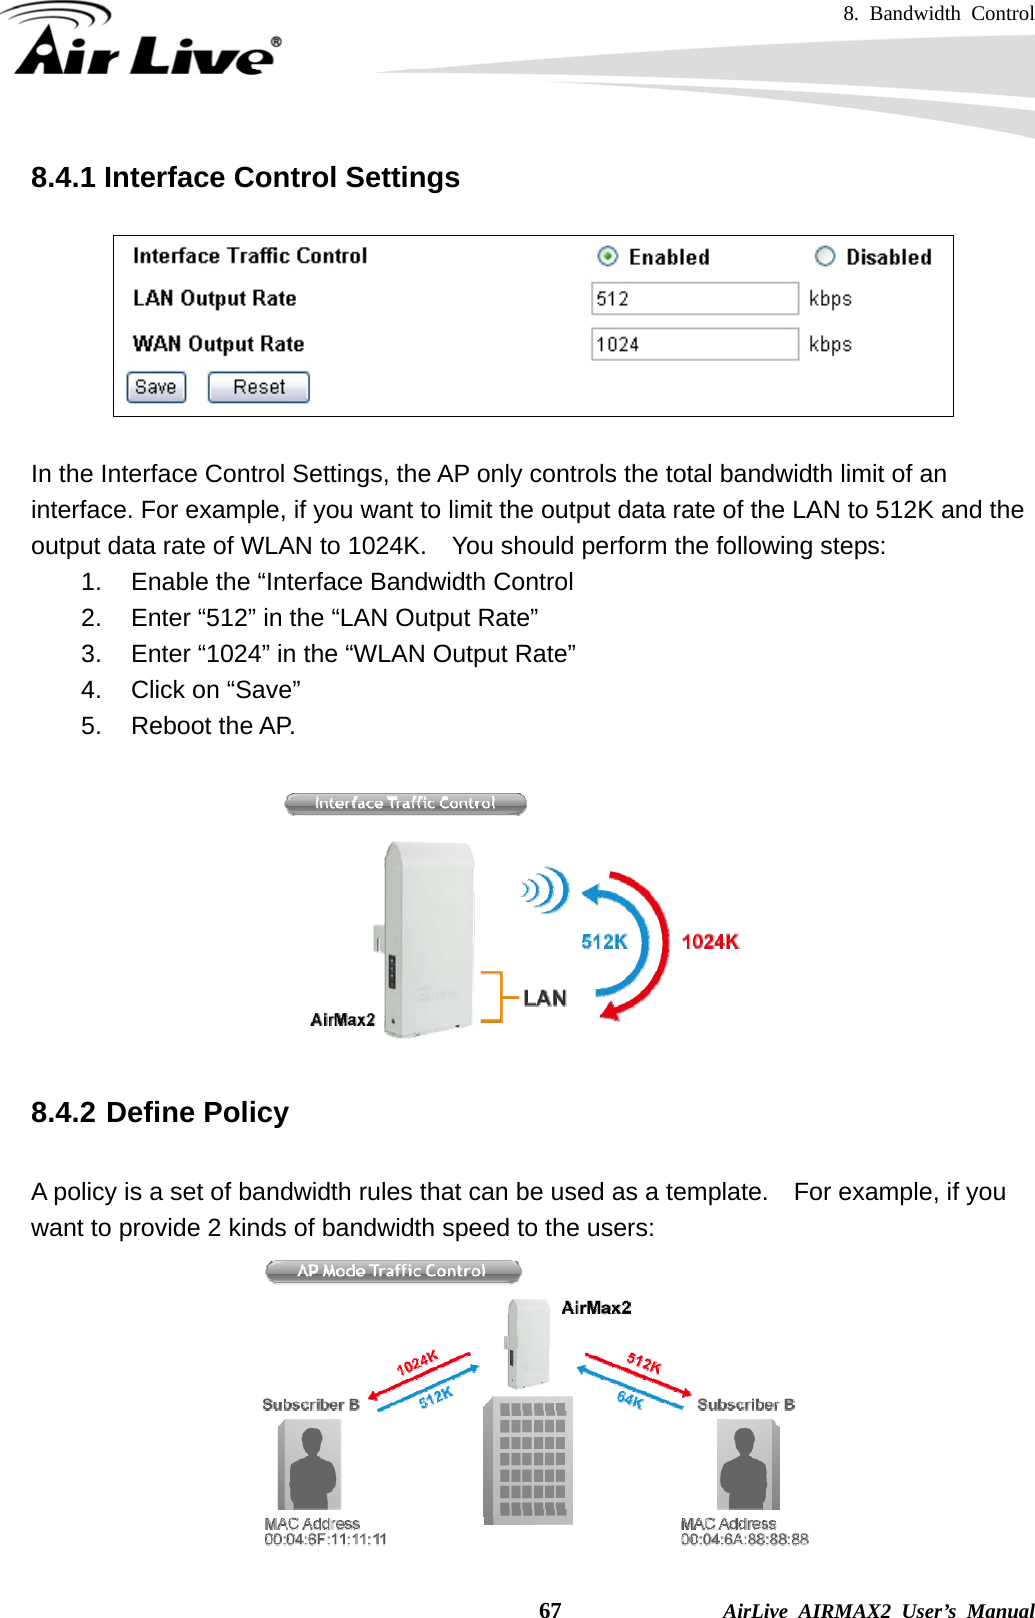 8. Bandwidth Control    67              AirLive AIRMAX2 User’s Manual 8.4.1 Interface Control Settings    In the Interface Control Settings, the AP only controls the total bandwidth limit of an interface. For example, if you want to limit the output data rate of the LAN to 512K and the output data rate of WLAN to 1024K.    You should perform the following steps: 1.  Enable the “Interface Bandwidth Control 2.  Enter “512” in the “LAN Output Rate” 3.  Enter “1024” in the “WLAN Output Rate” 4.  Click on “Save” 5. Reboot the AP.     8.4.2 Define Policy  A policy is a set of bandwidth rules that can be used as a template.    For example, if you want to provide 2 kinds of bandwidth speed to the users:  